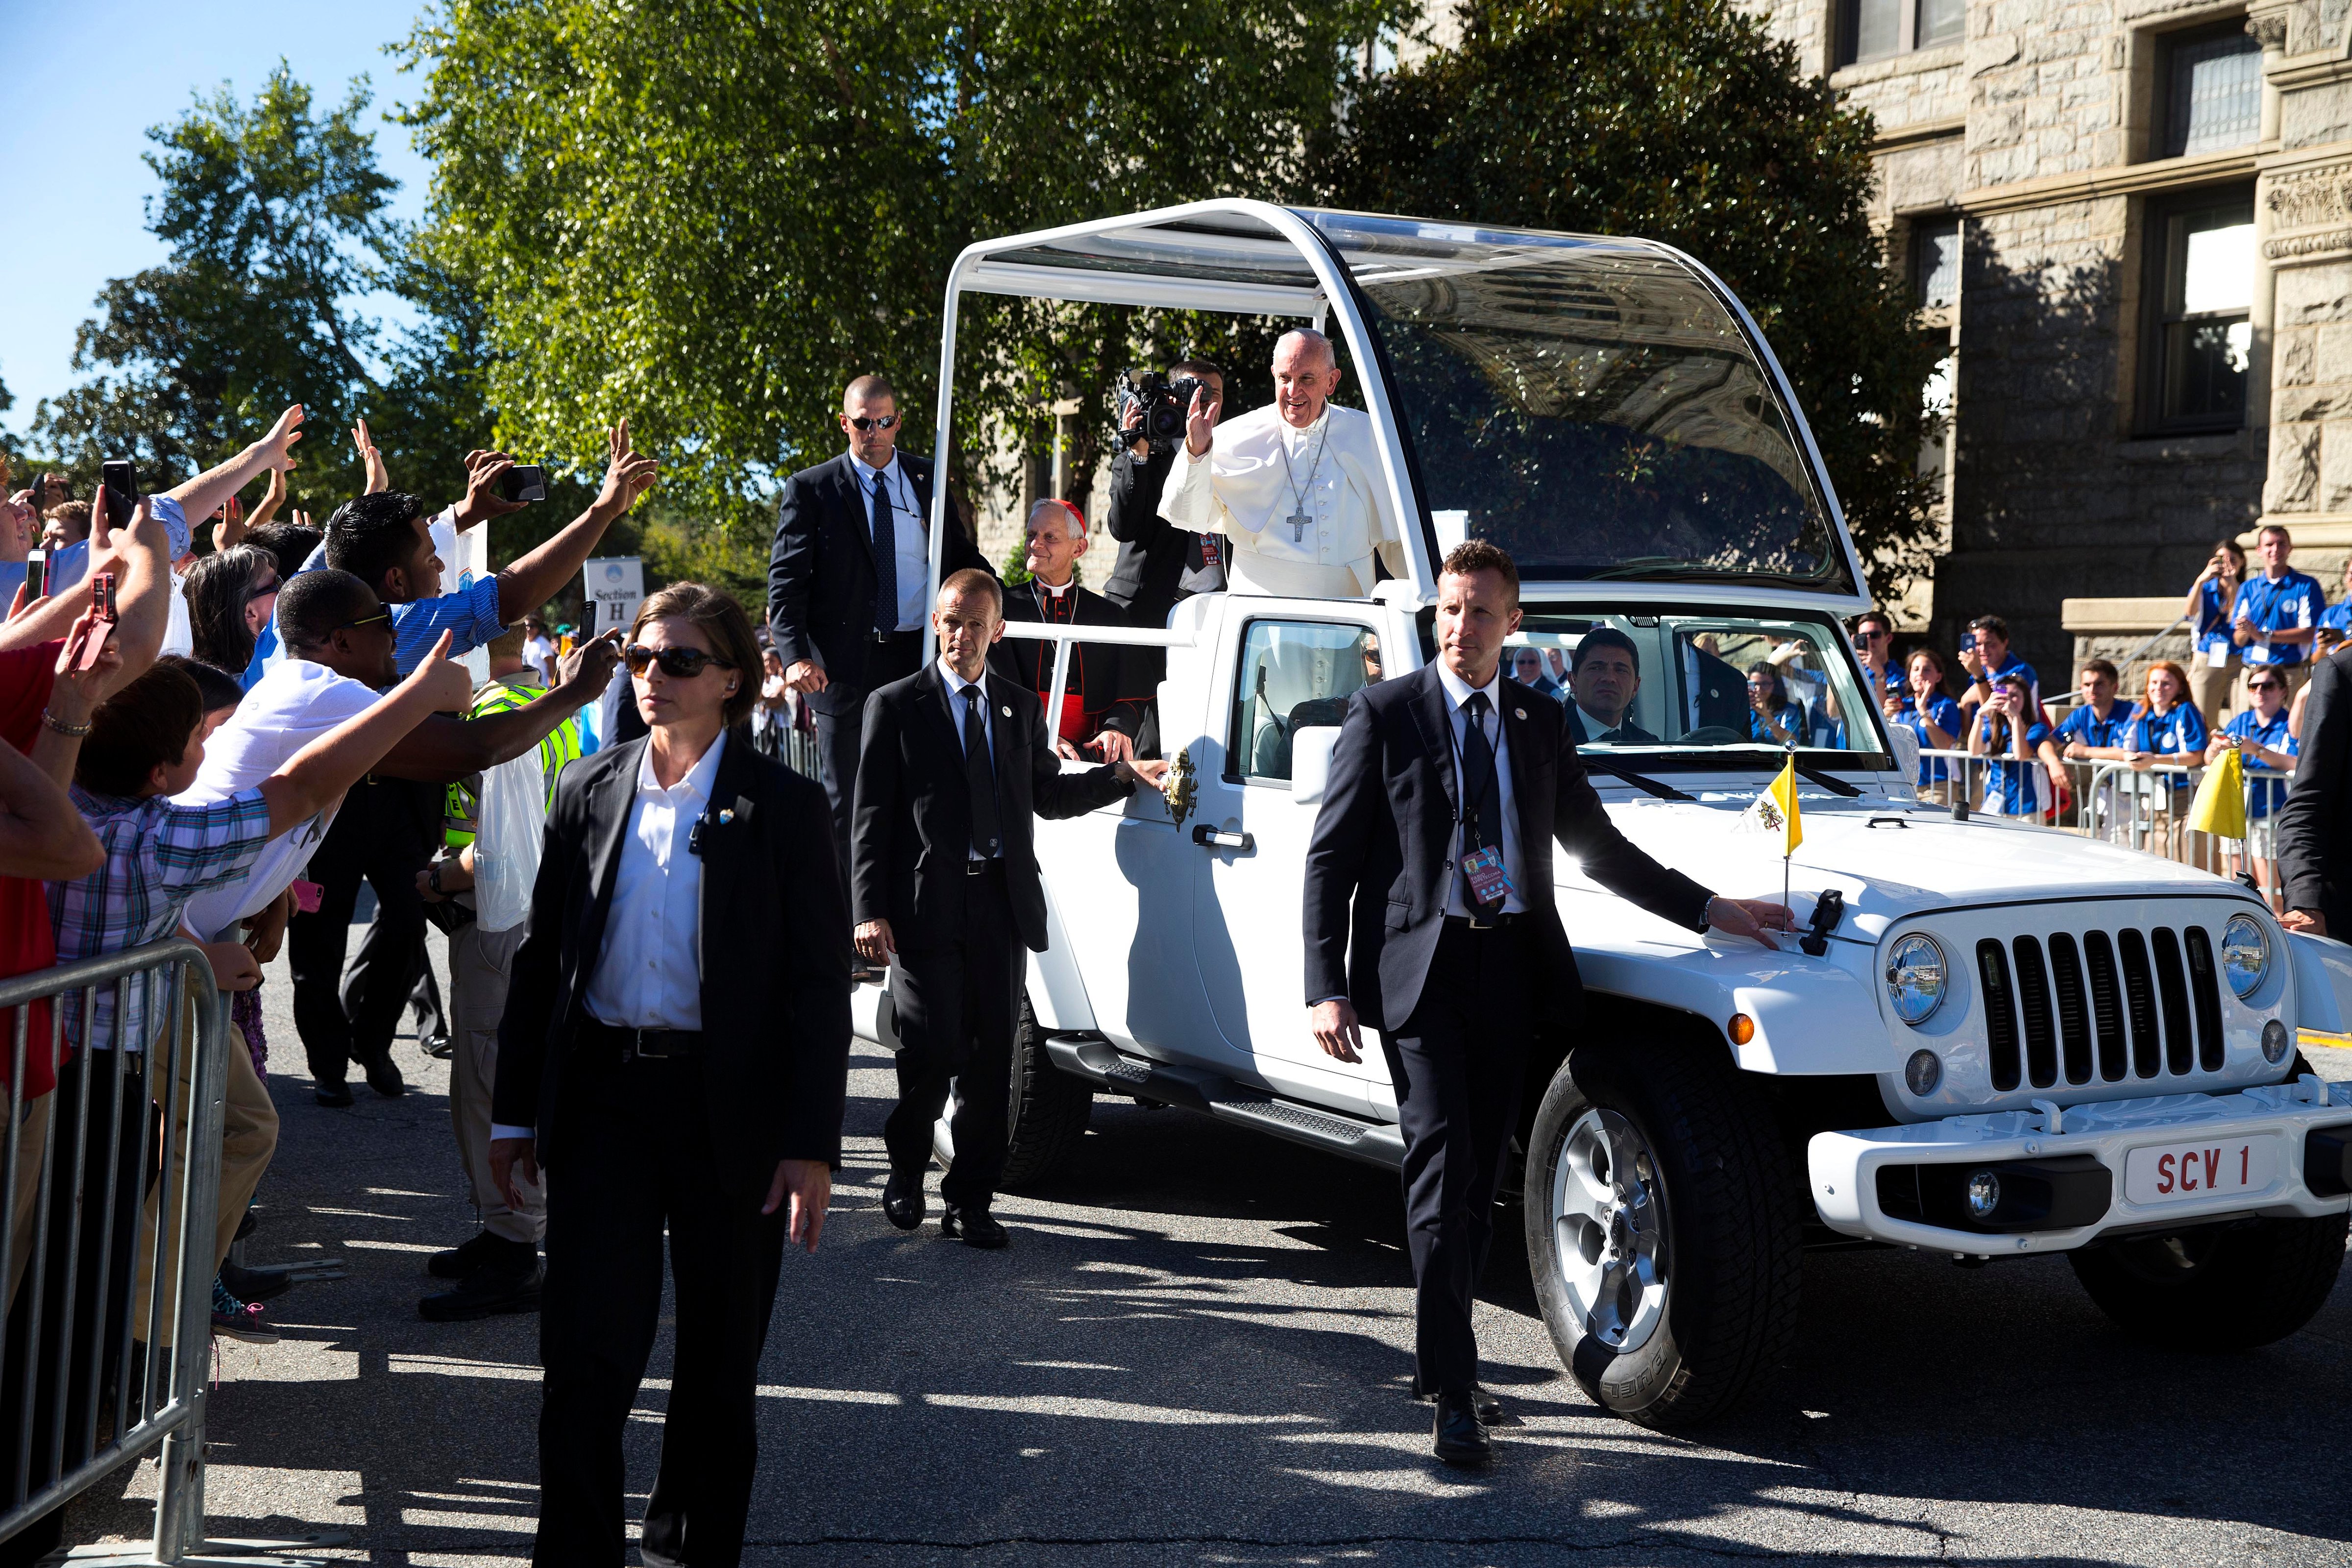 Pope Francis arrives at Catholic University for a Canonization Mass in Washington on Sept. 23, 2015. (Doug Mills—Reuters)